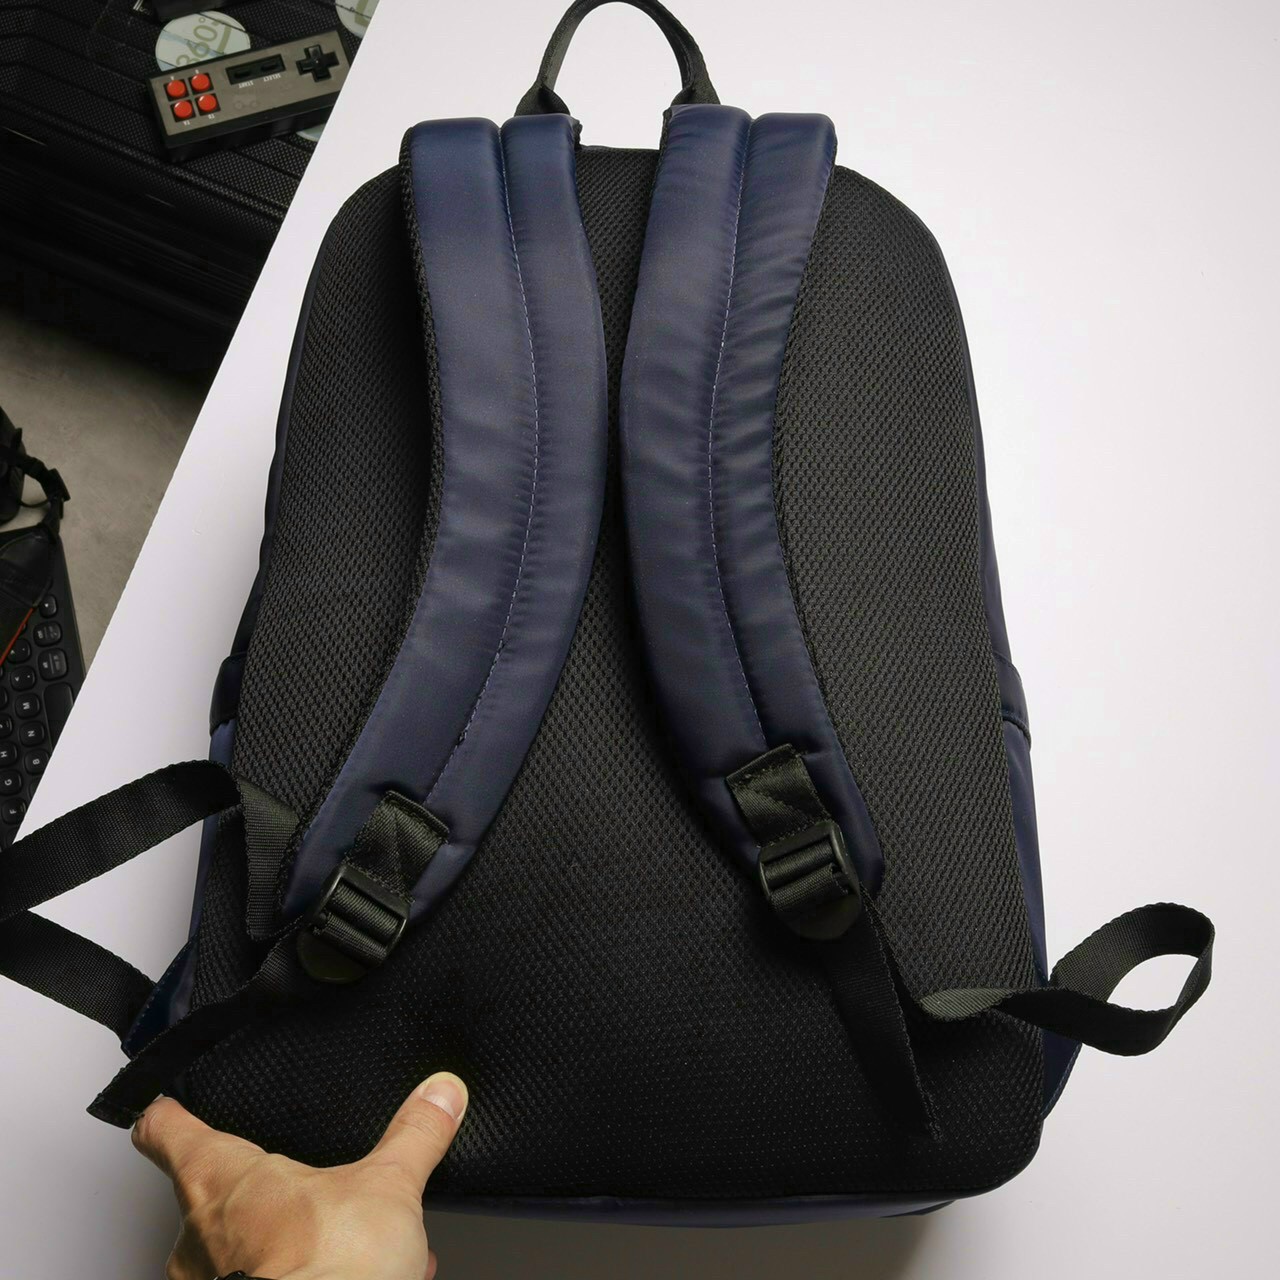 BALO XANH TOMMY HILFIGER BACKPACK 7